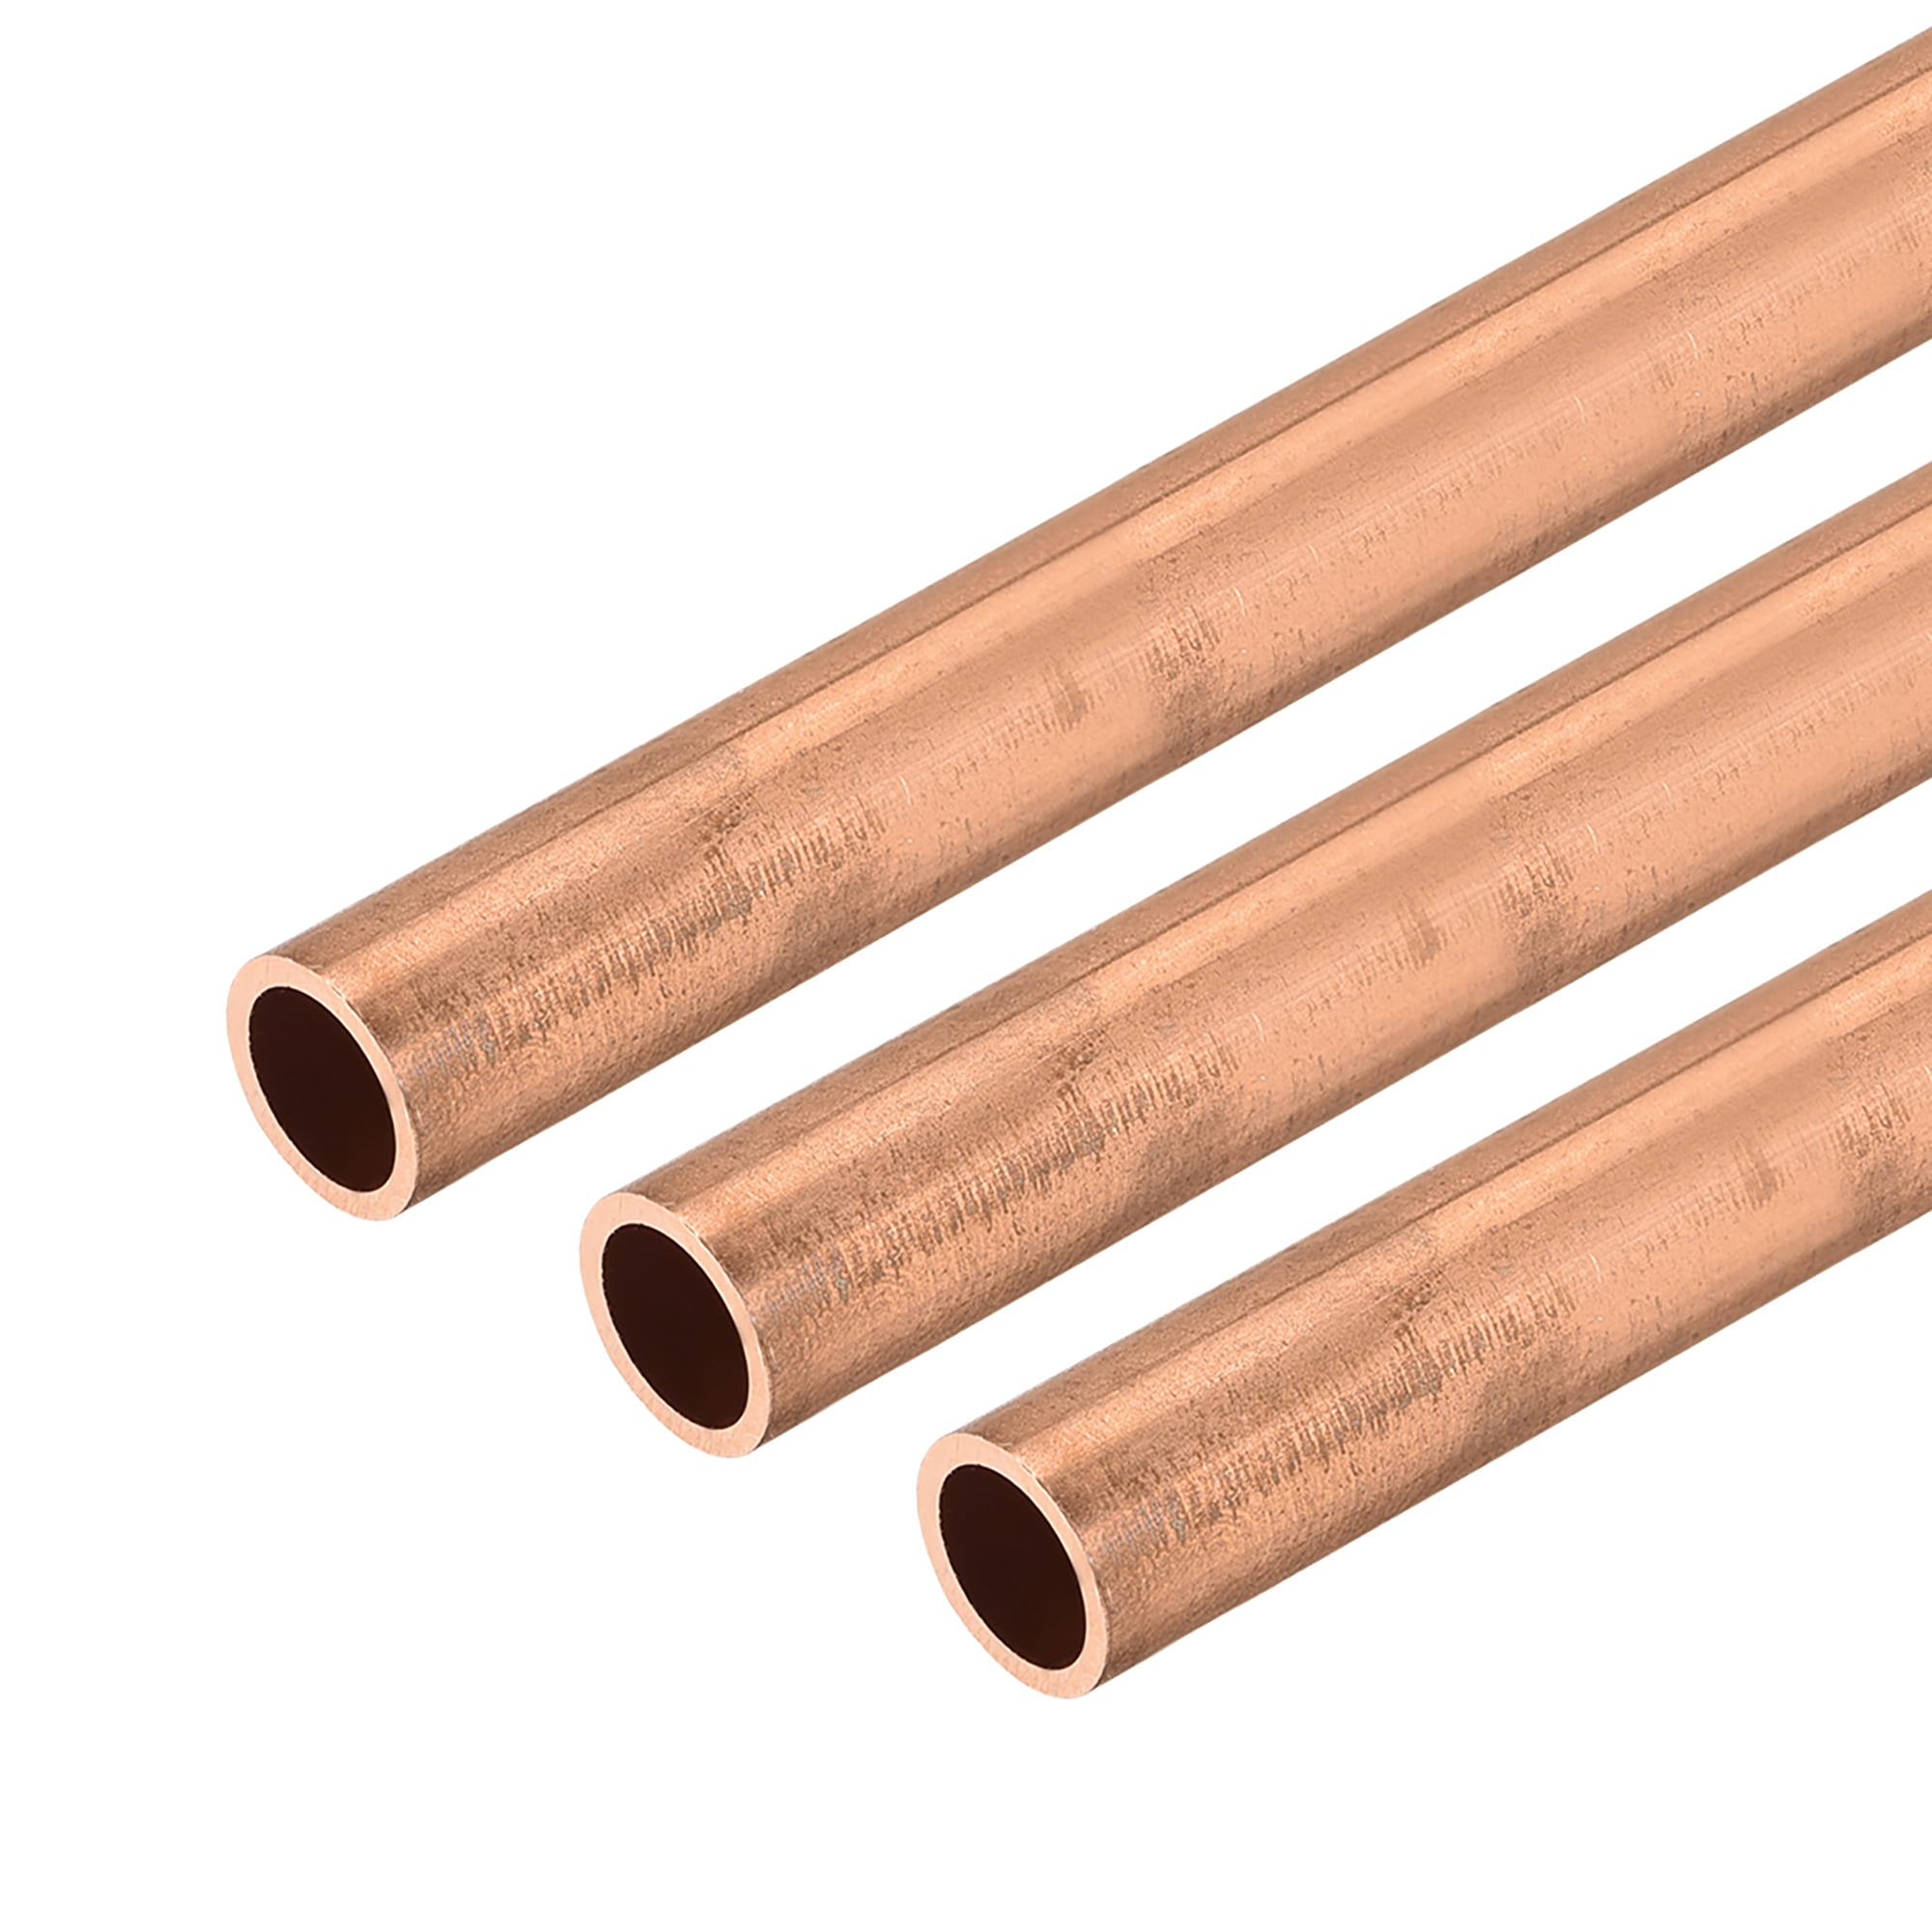 uxcell Copper Round Tube 2mm OD 0.2mm Wall Thickness 300mm Long Straight Pipe Tubing 2 Pcs 